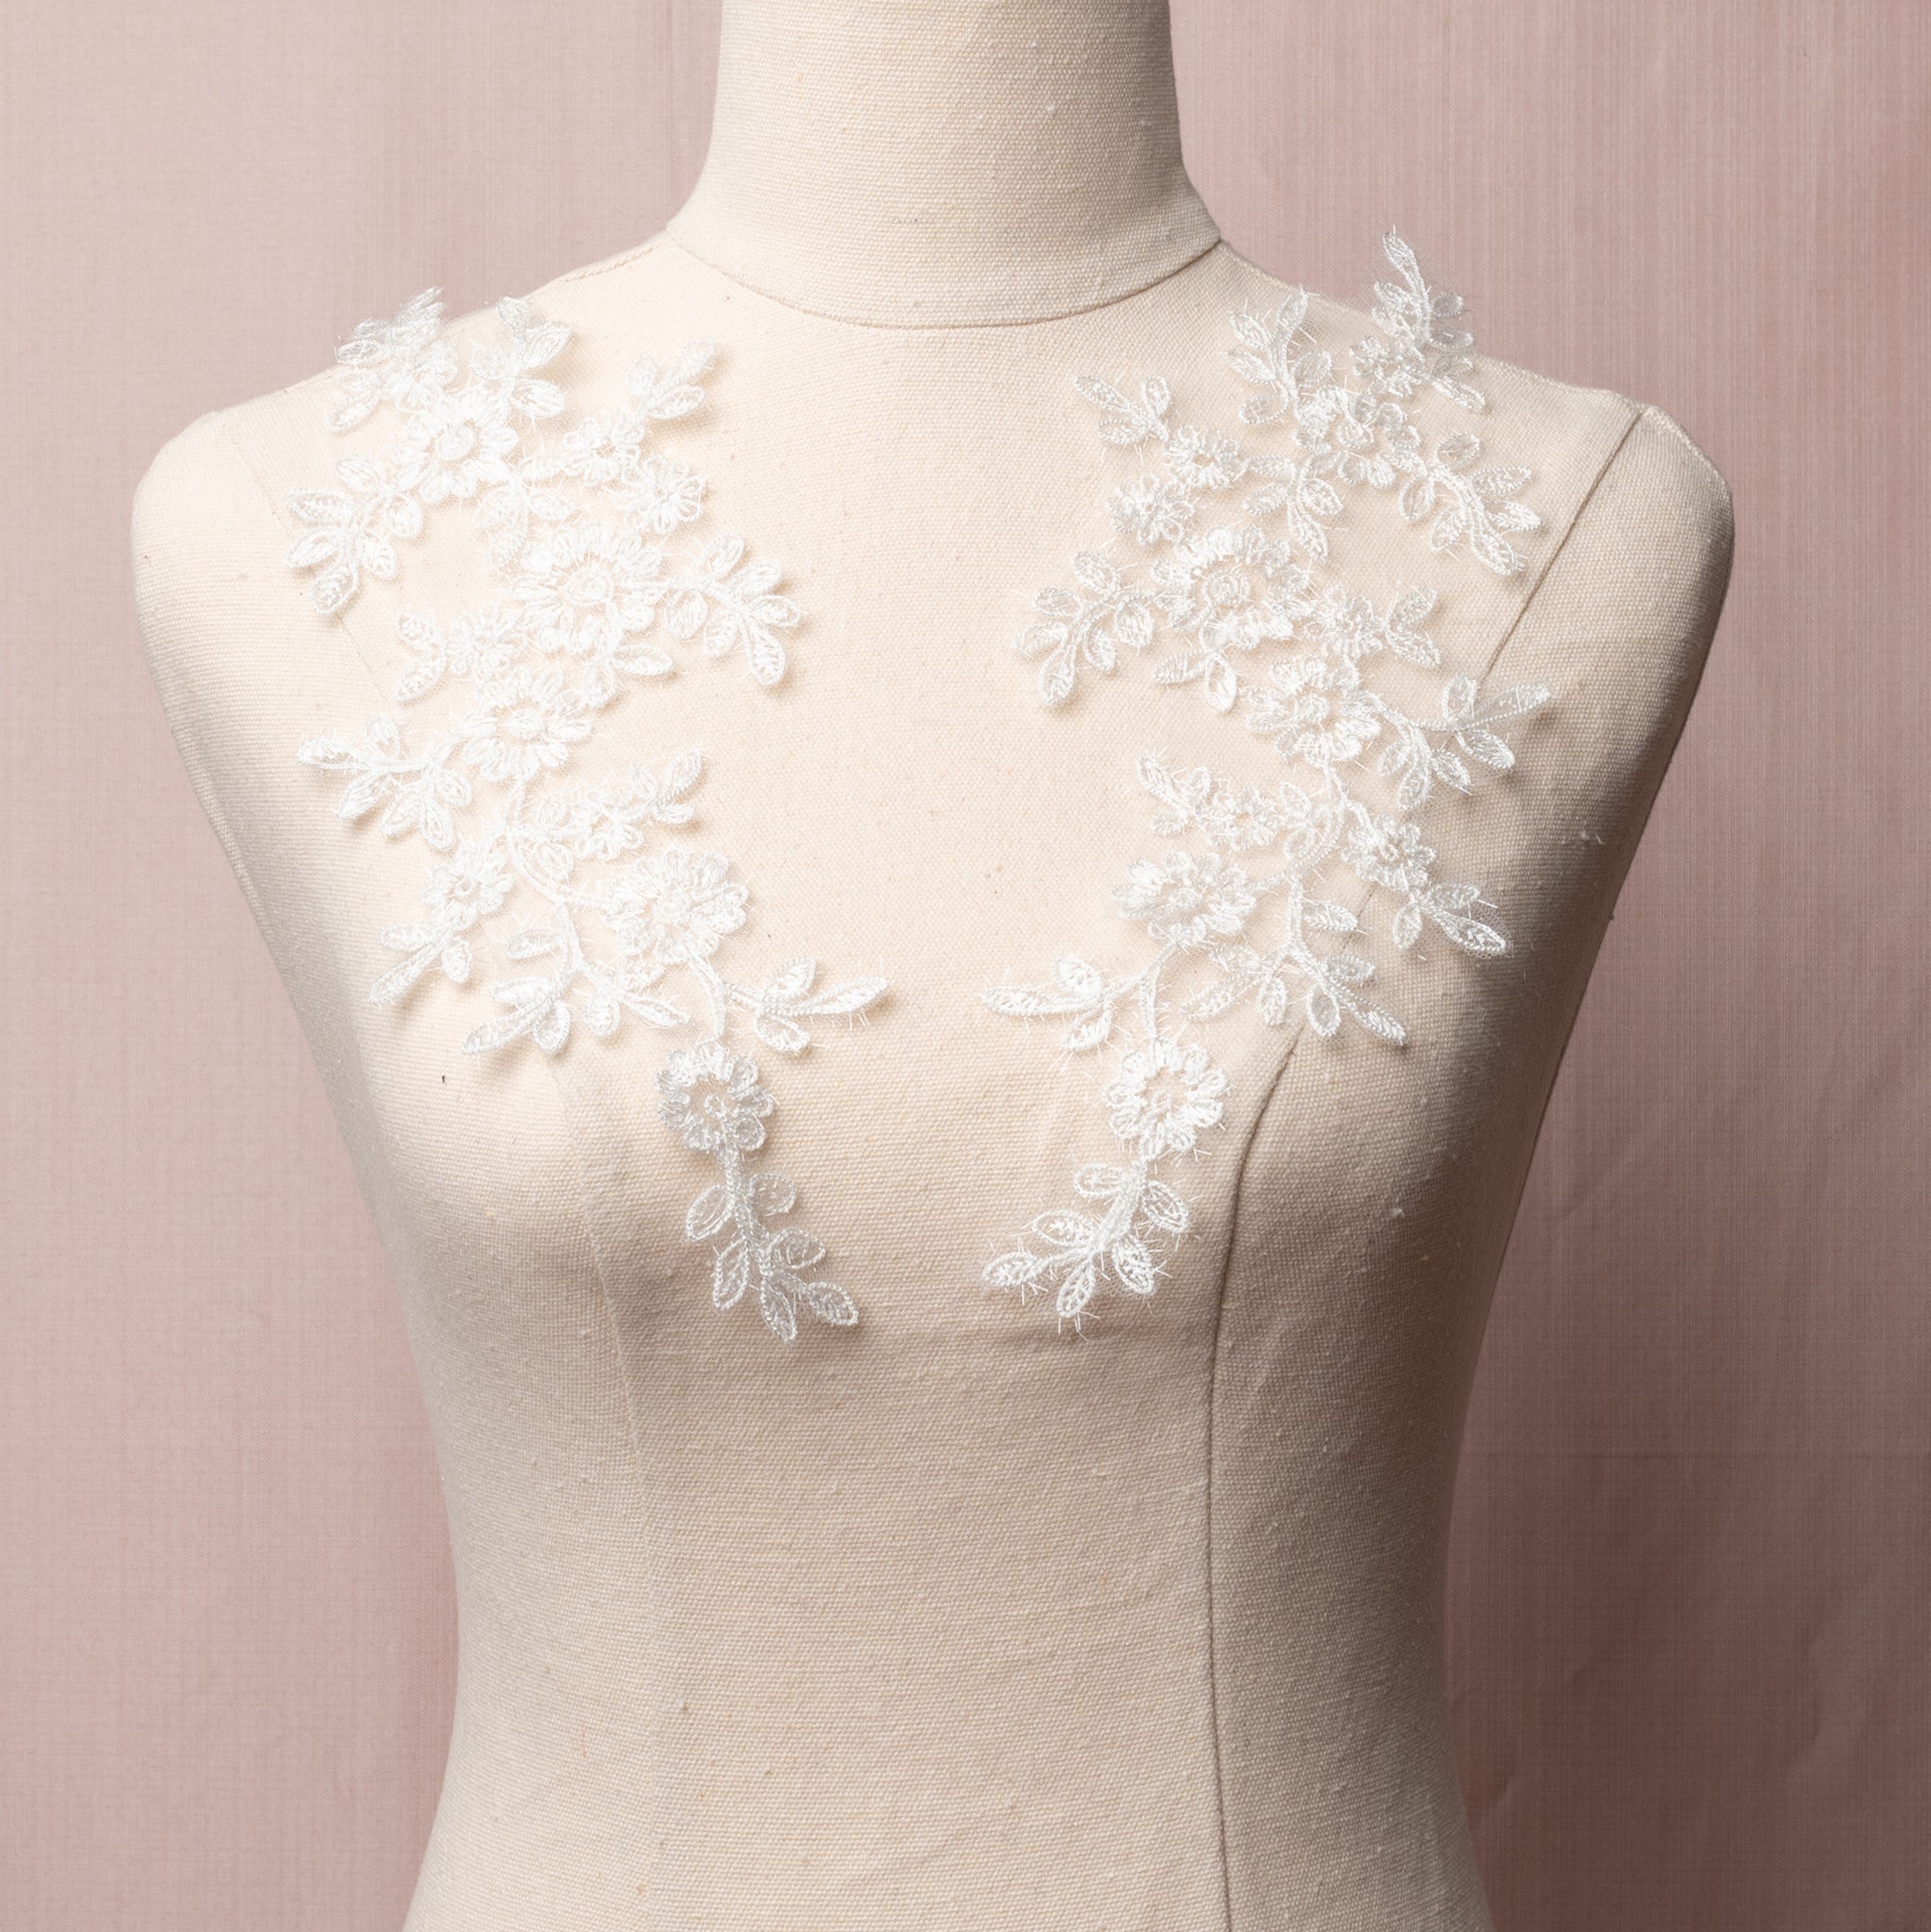 White floral applique embroidered with sparkly eye lash glitter thread.  The appliques are displayed on a mannequin.